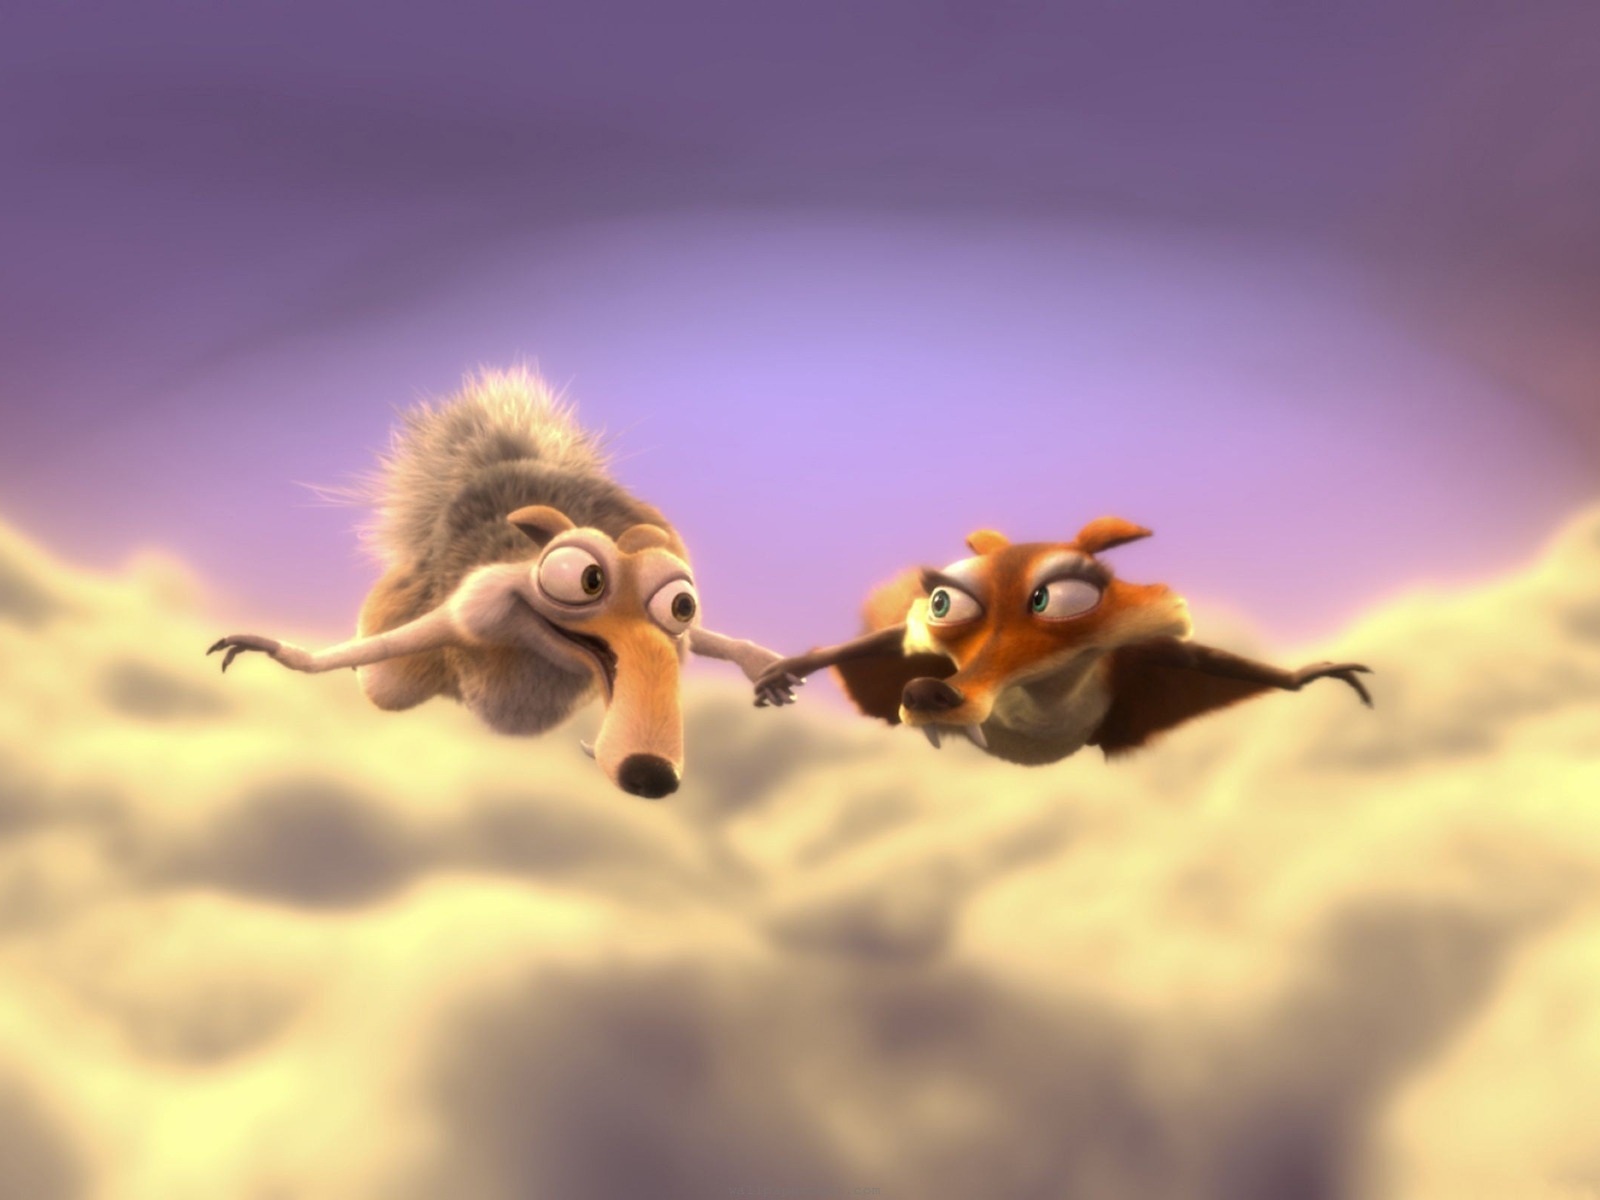 Scrat and Scratte for 1600 x 1200 resolution